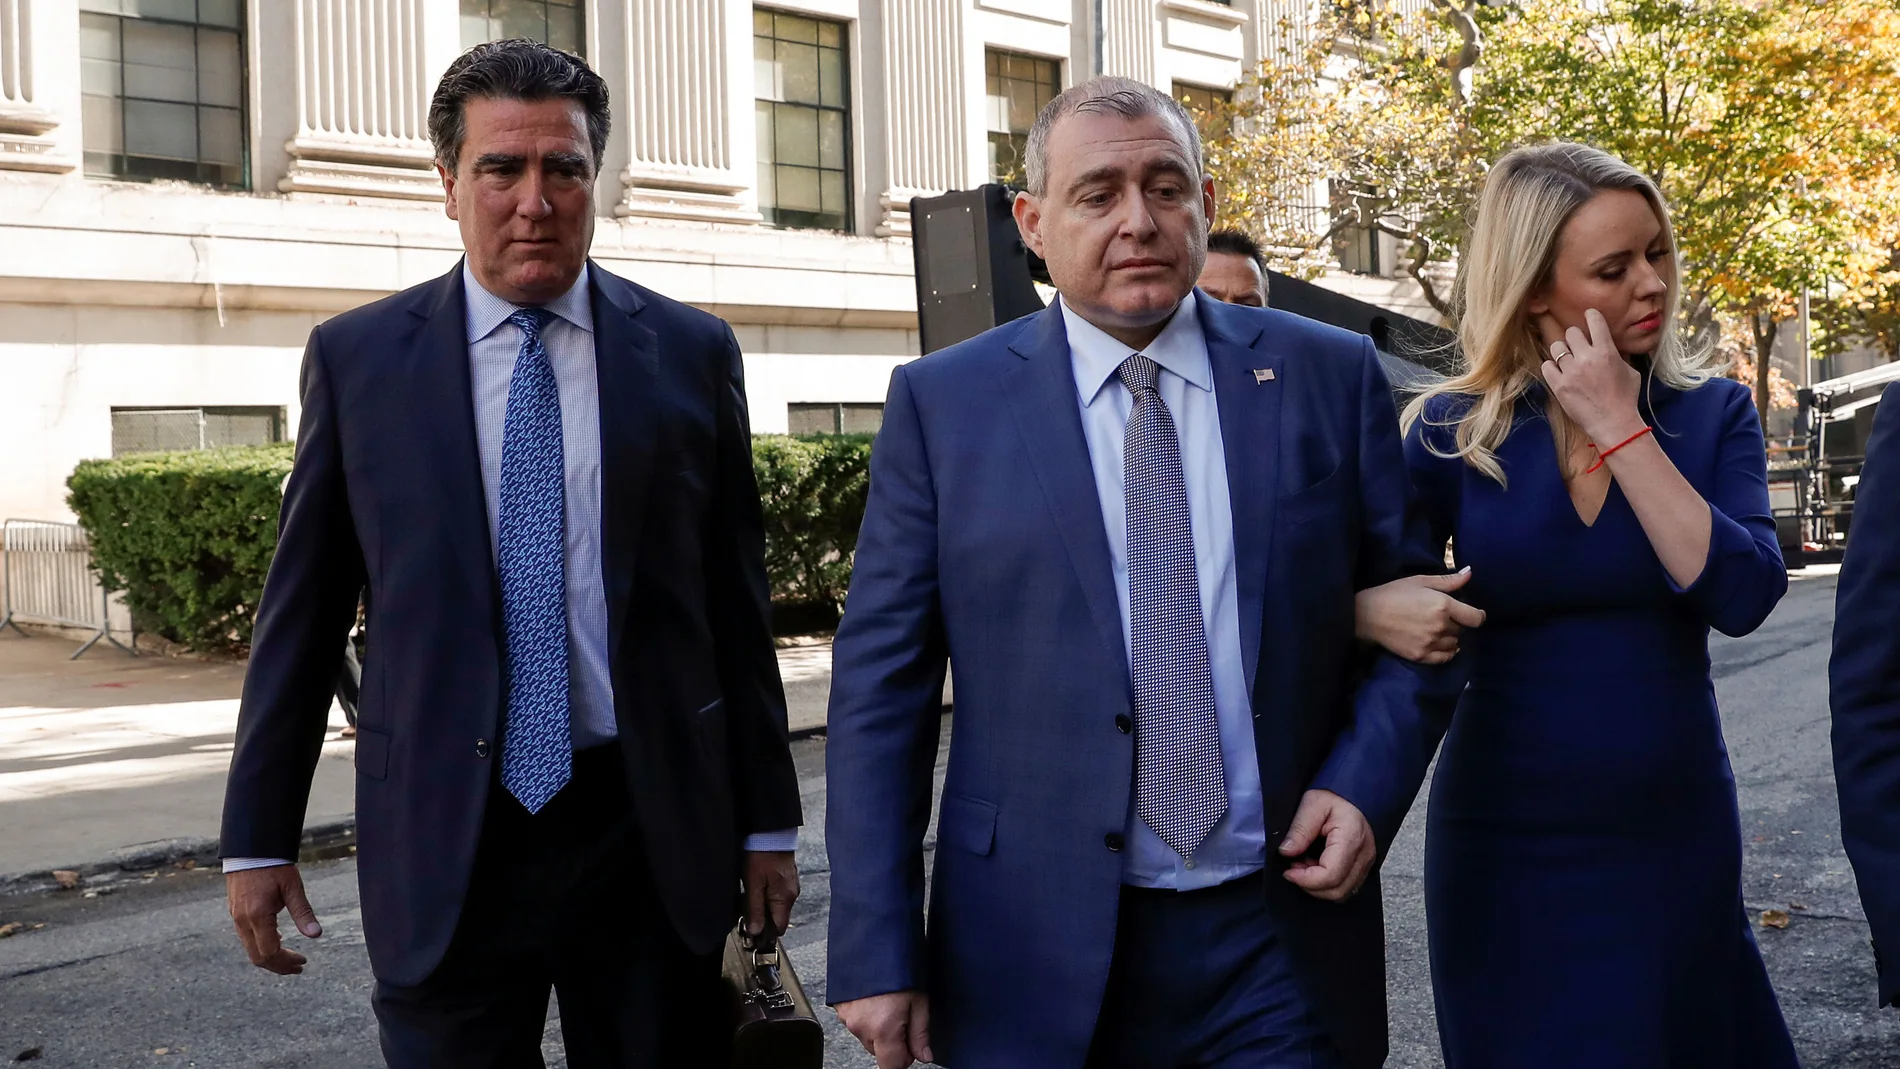 Ukrainian-American businessman Lev Parnas arrives for his arraignment at the United States Courthouse in New York